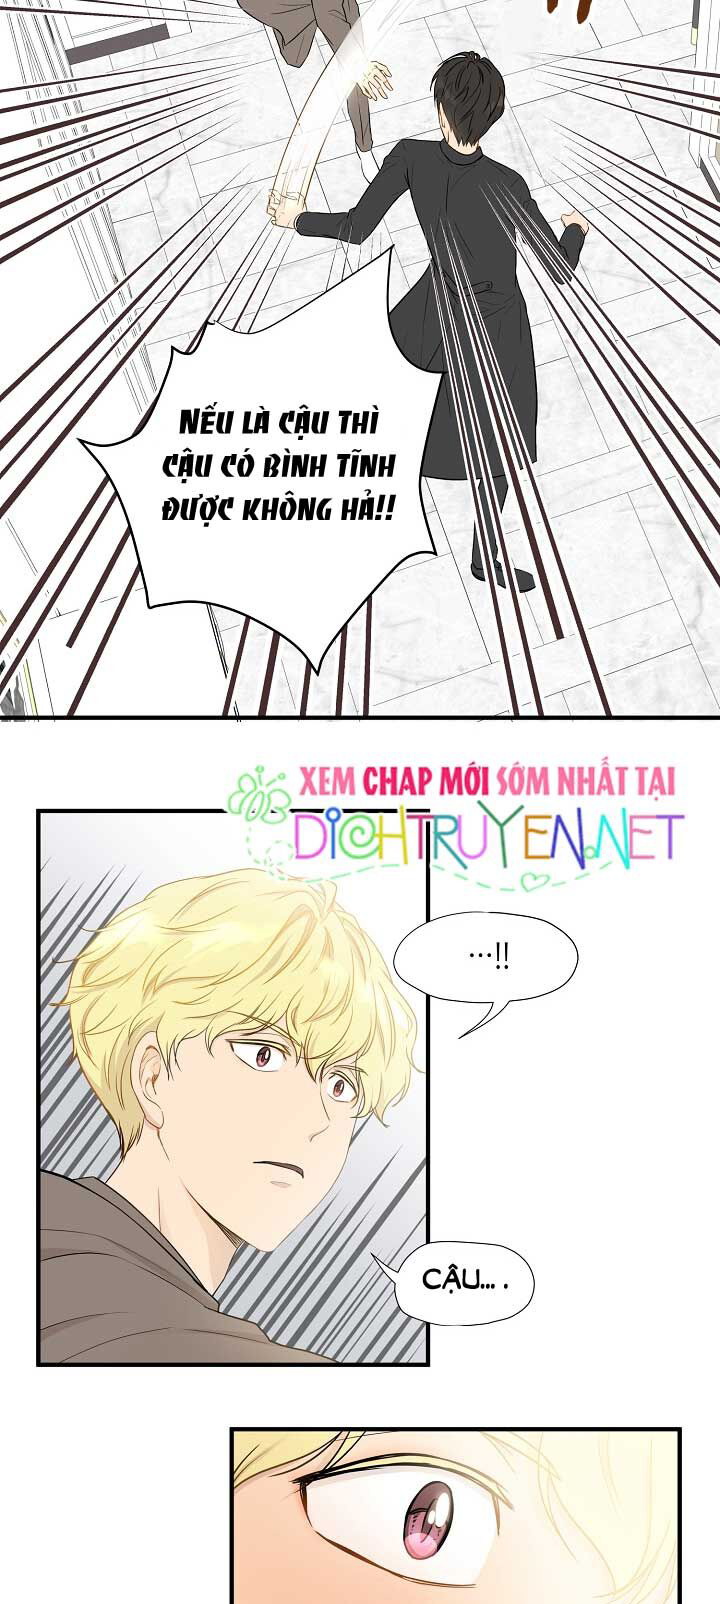 cuoc-song-ky-thu-chap-4-36